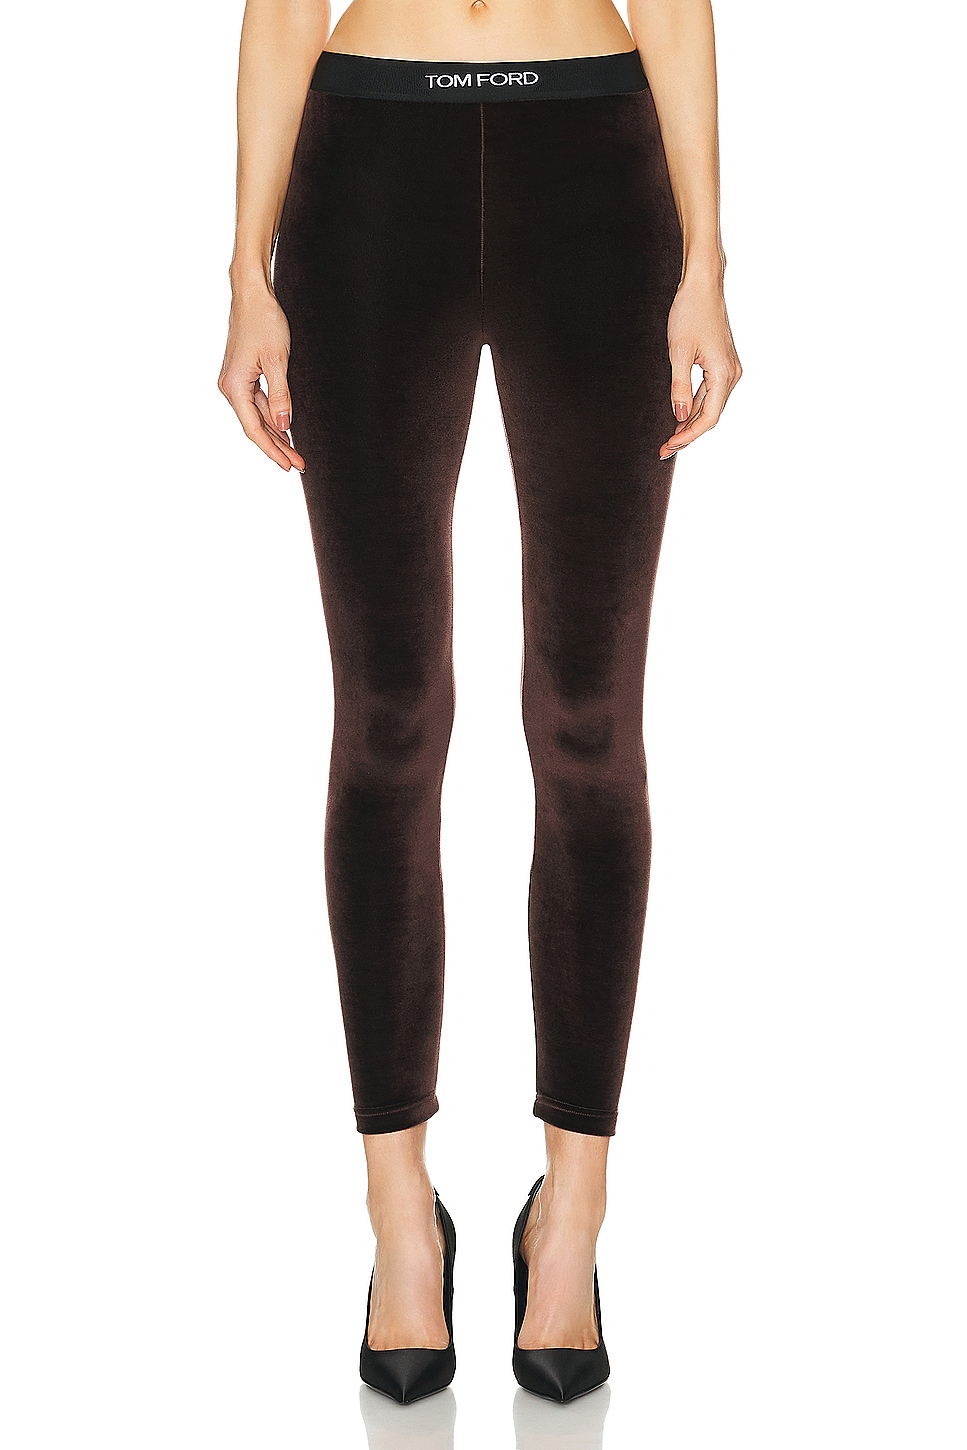 Image 1 of TOM FORD Signature Legging in Chocolate Brown